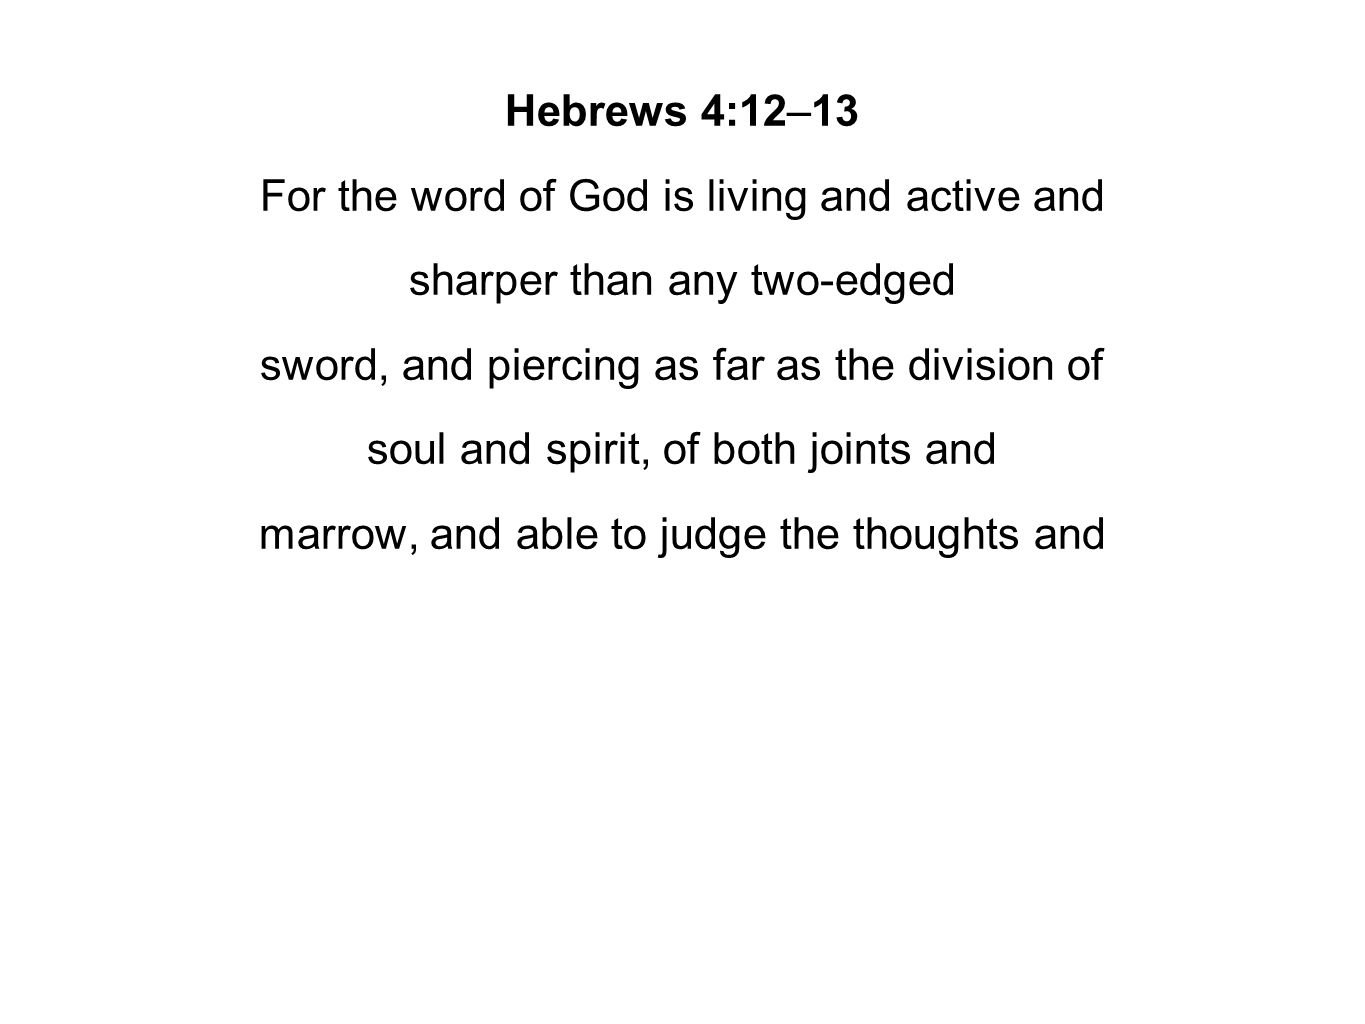 Hebrews 4:12–13 For the word of God is living and active and sharper than any two-edged sword, and piercing as far as the division of soul and spirit, of both joints and marrow, and able to judge the thoughts and